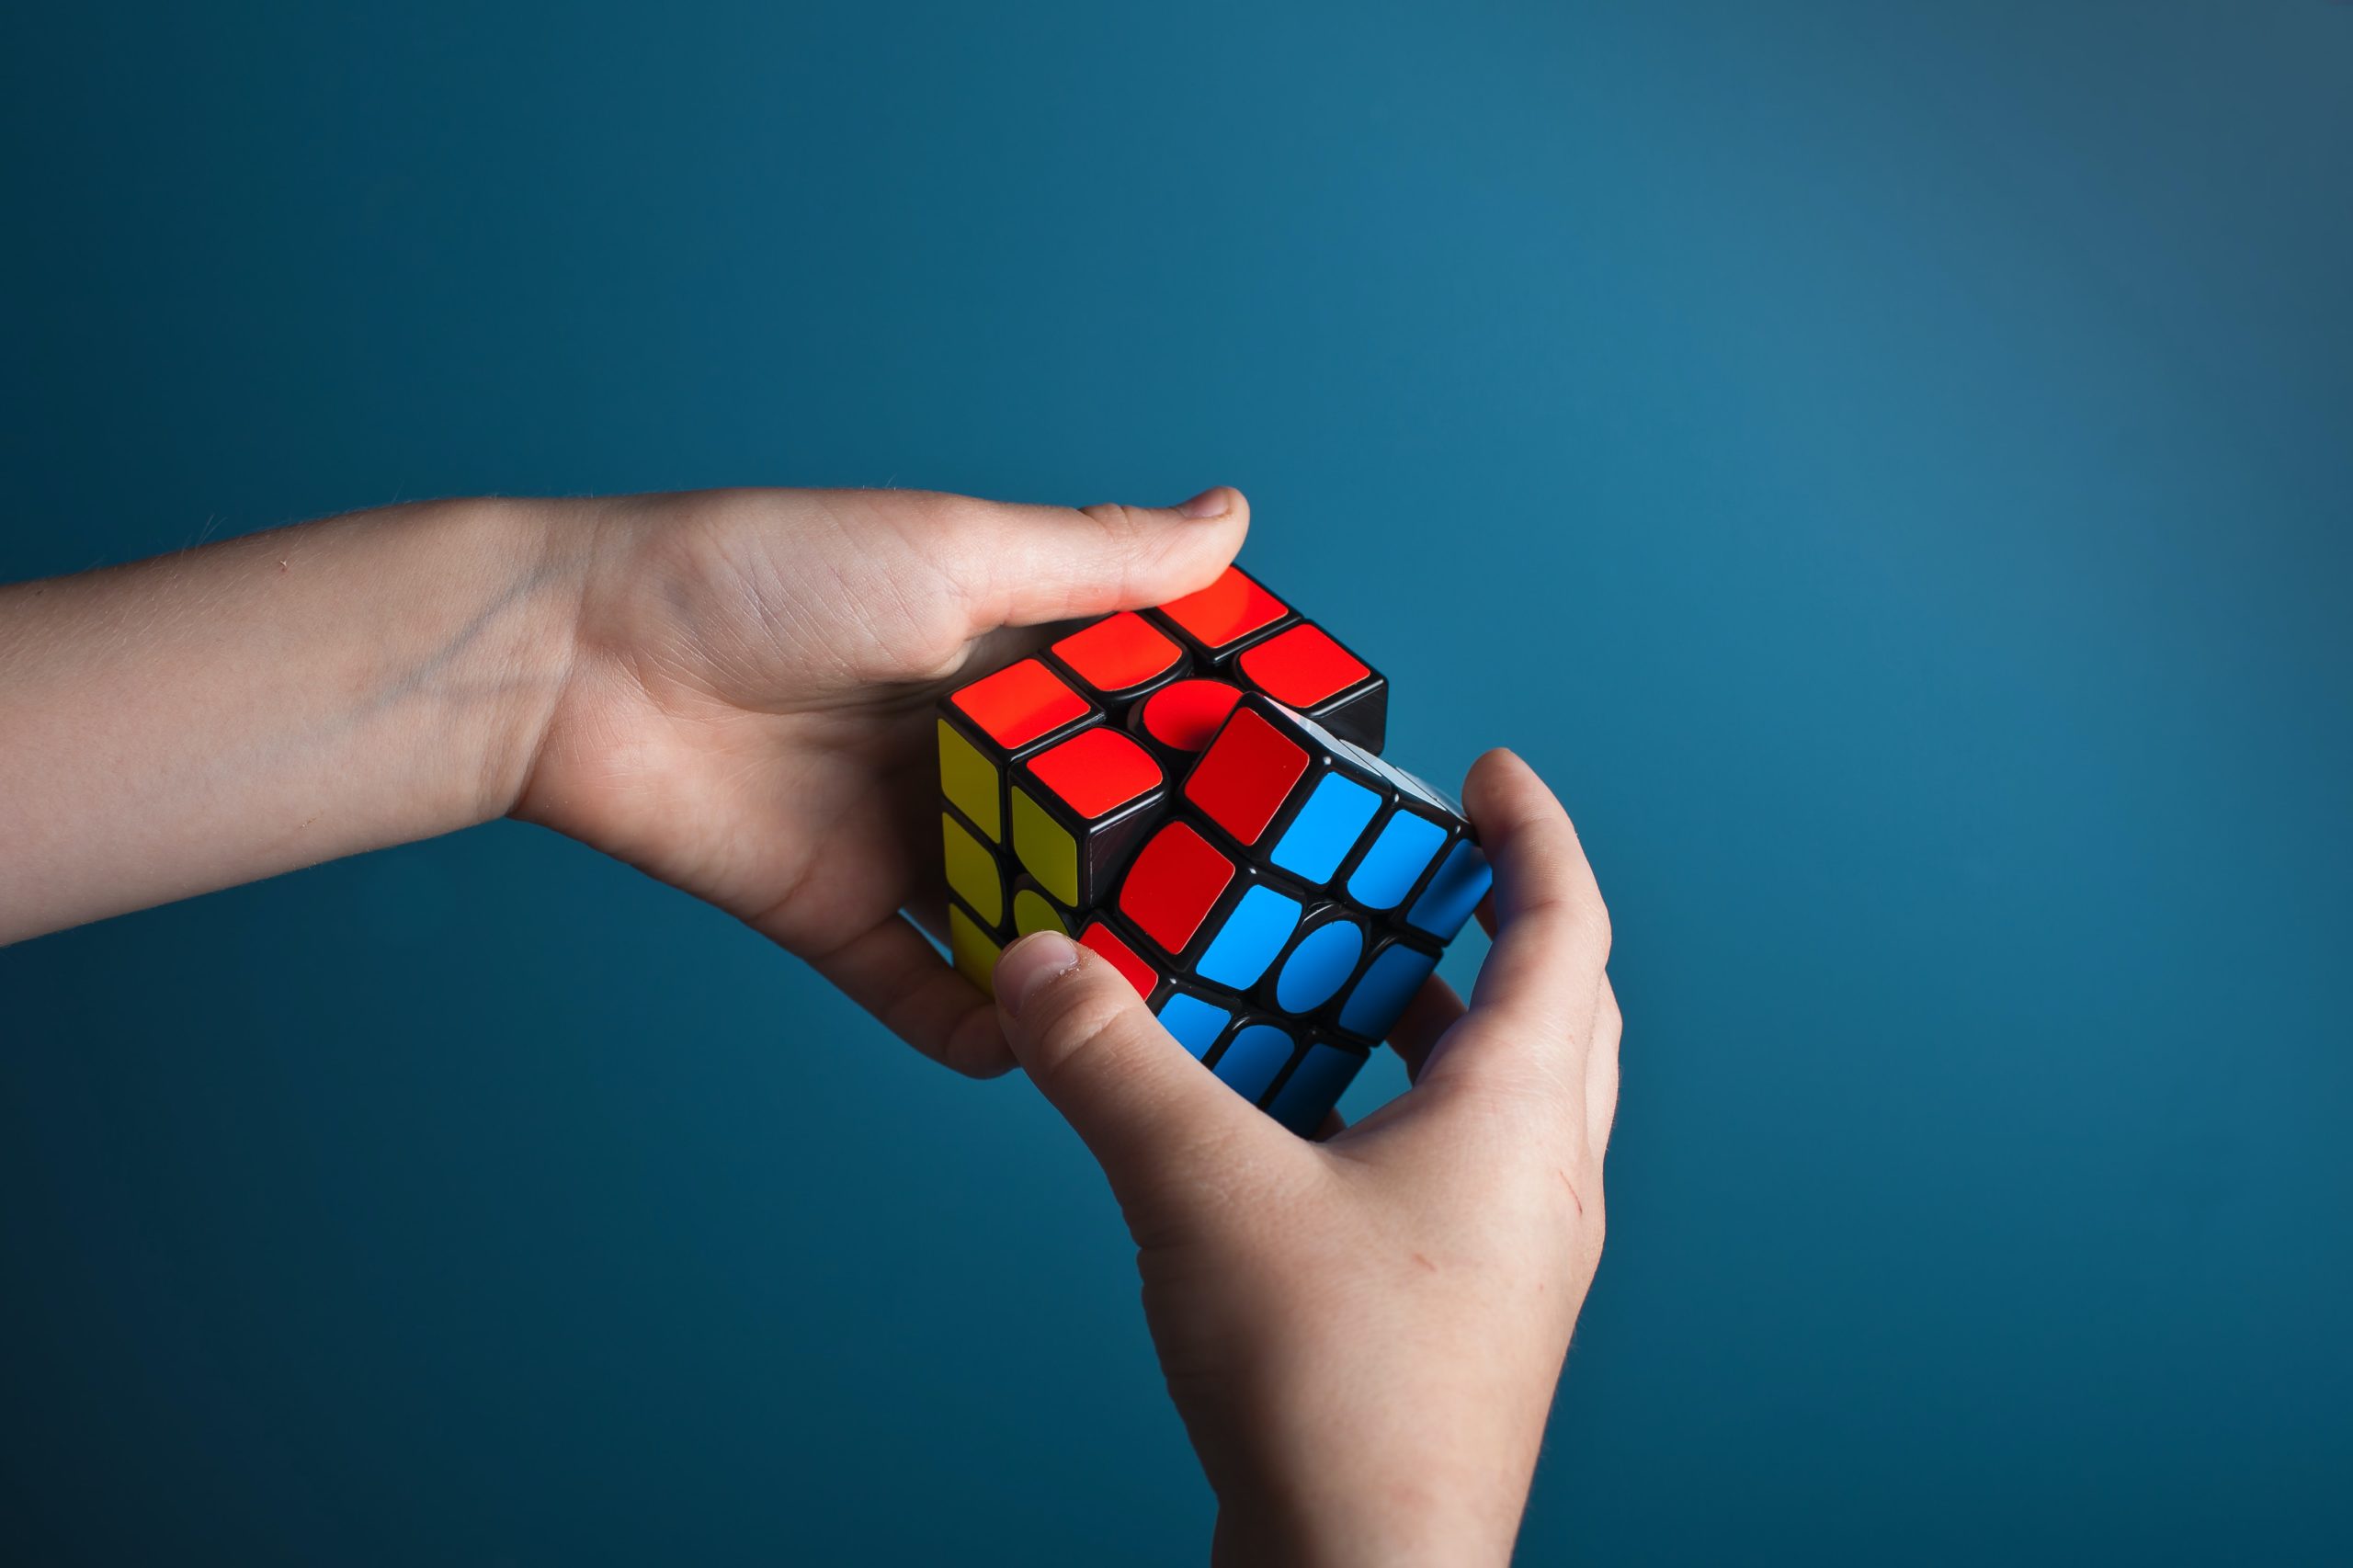 Someone about to solve. a Rubiks cube, holding it against a blue background.